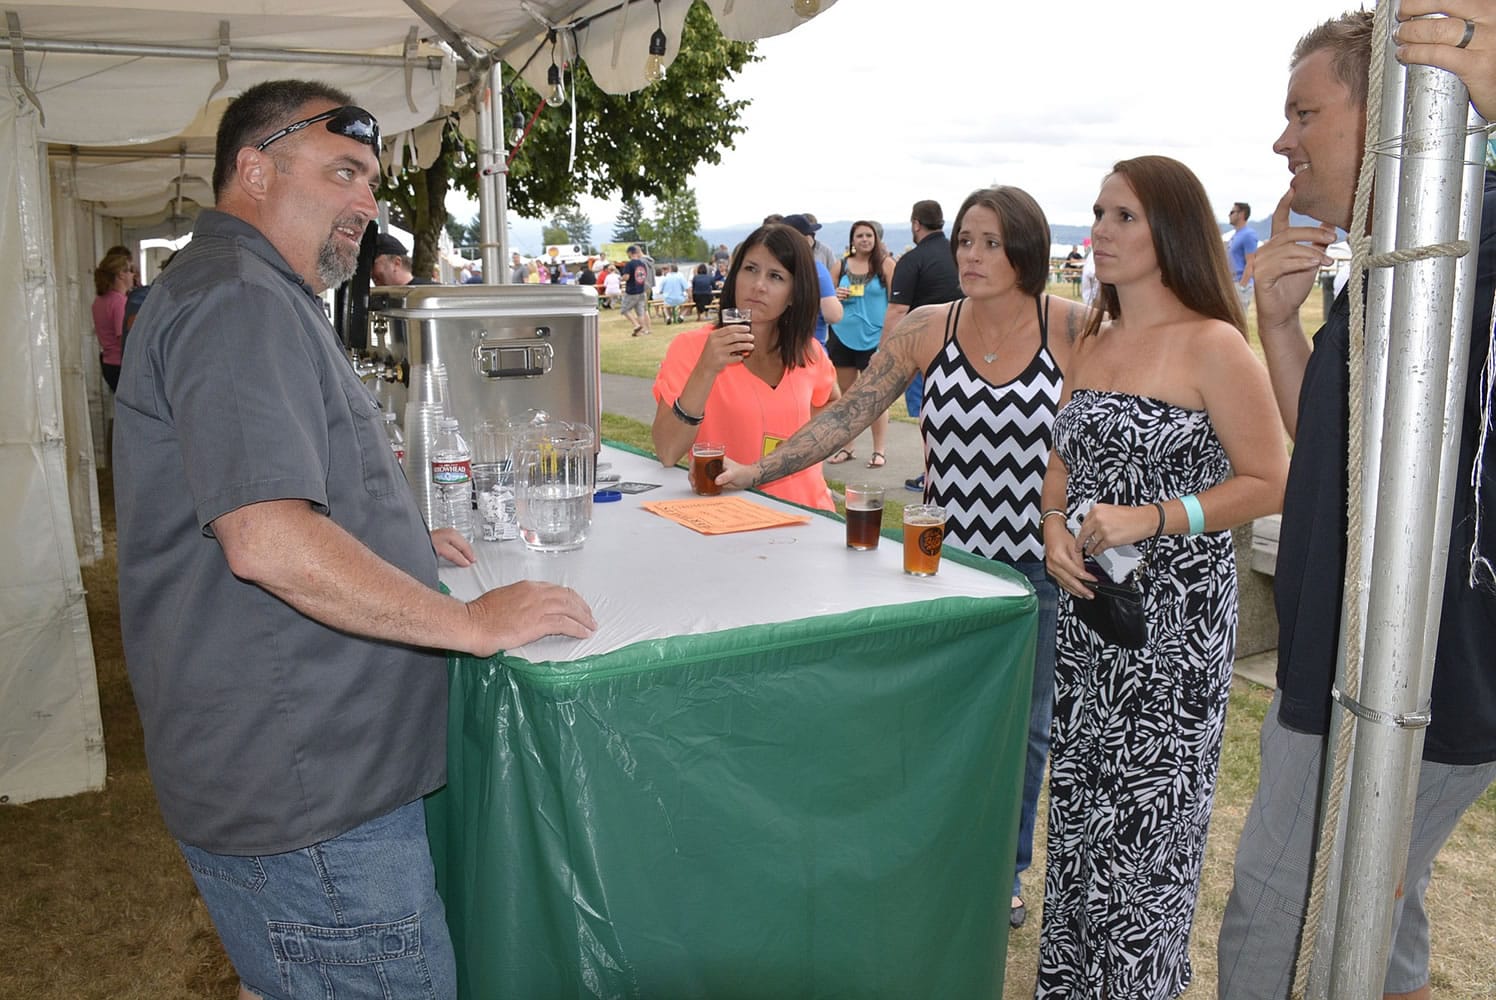 Washougal: Mark Zech, left, of Mill City Brew Werks in Camas serving guests at the first ever Weird Beer on the River fundraisers in Washougal on July 10 and 11.